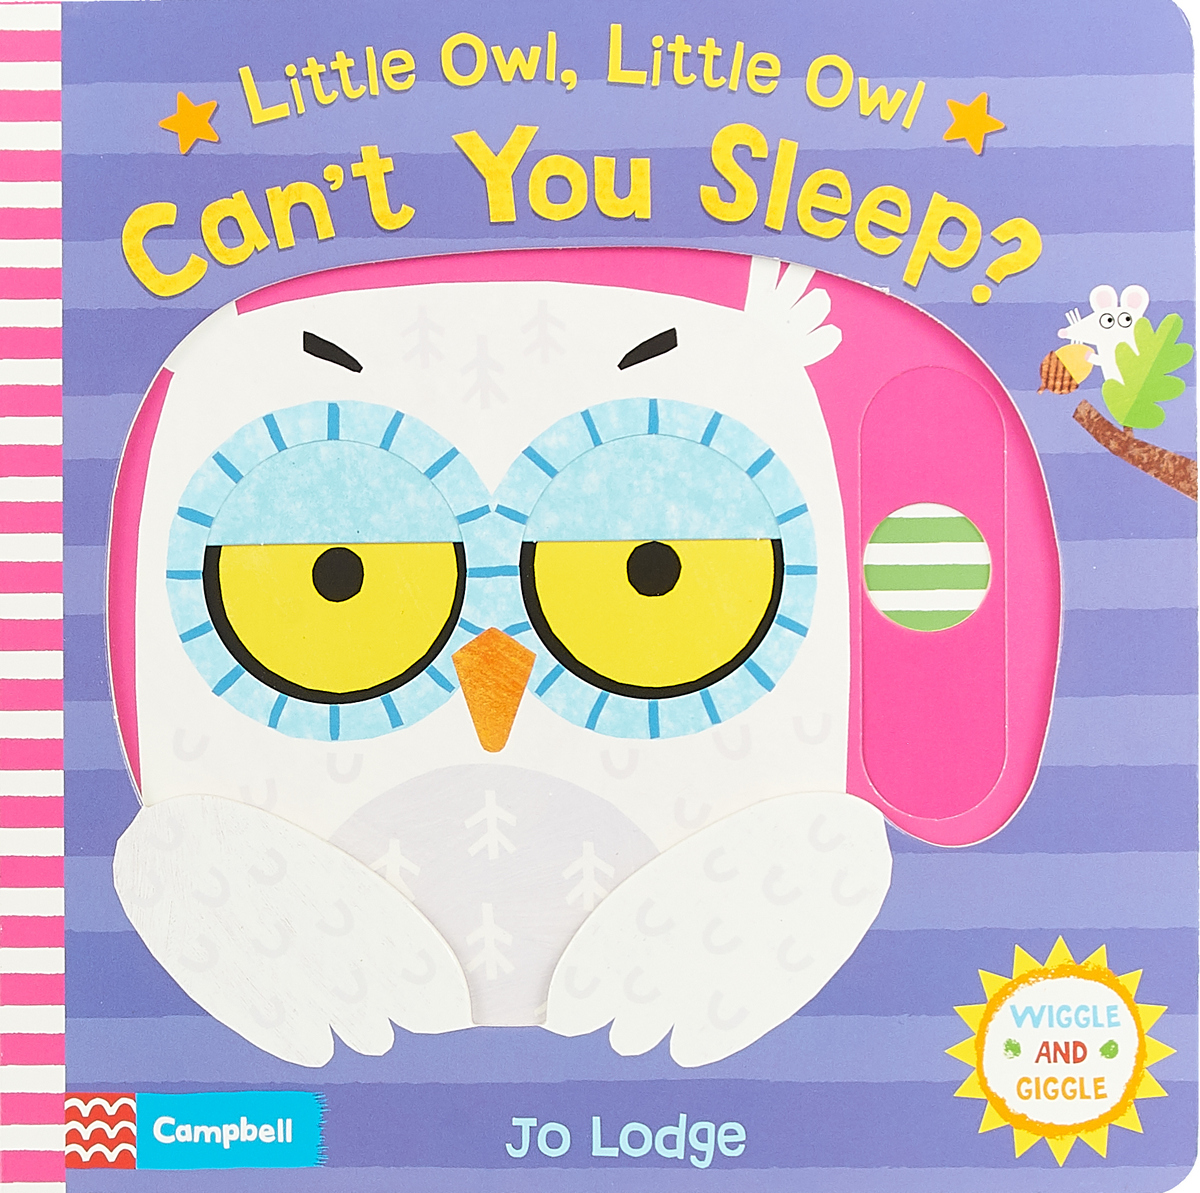 The little Owl New York. Lil Owl. Little Owl Lost OZON. Little life book